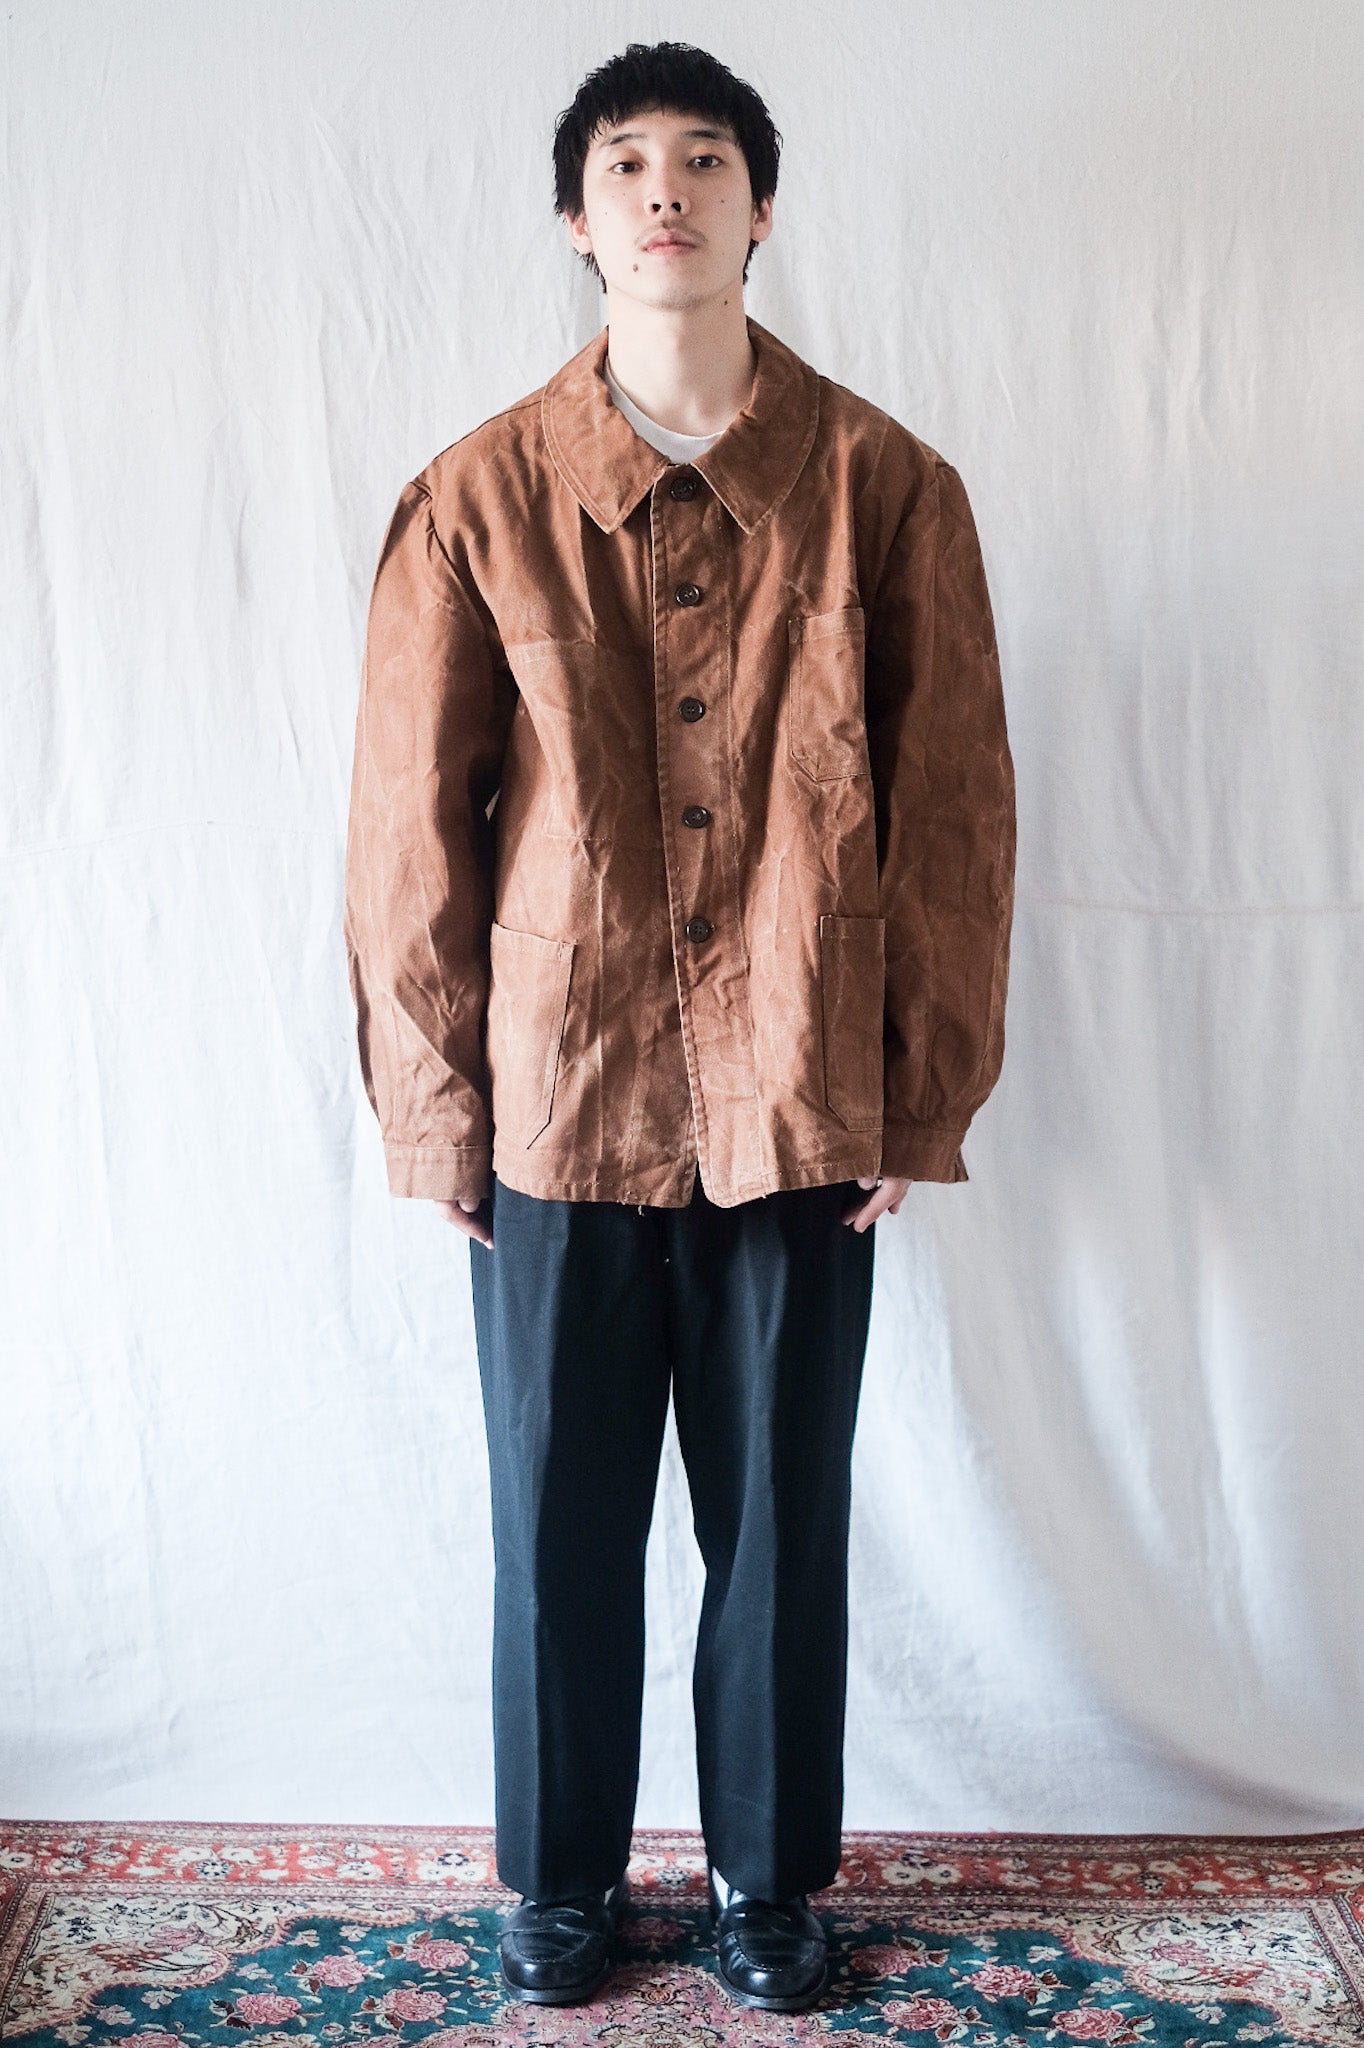 [~ 50's] French Vintage RailRoad Jacket